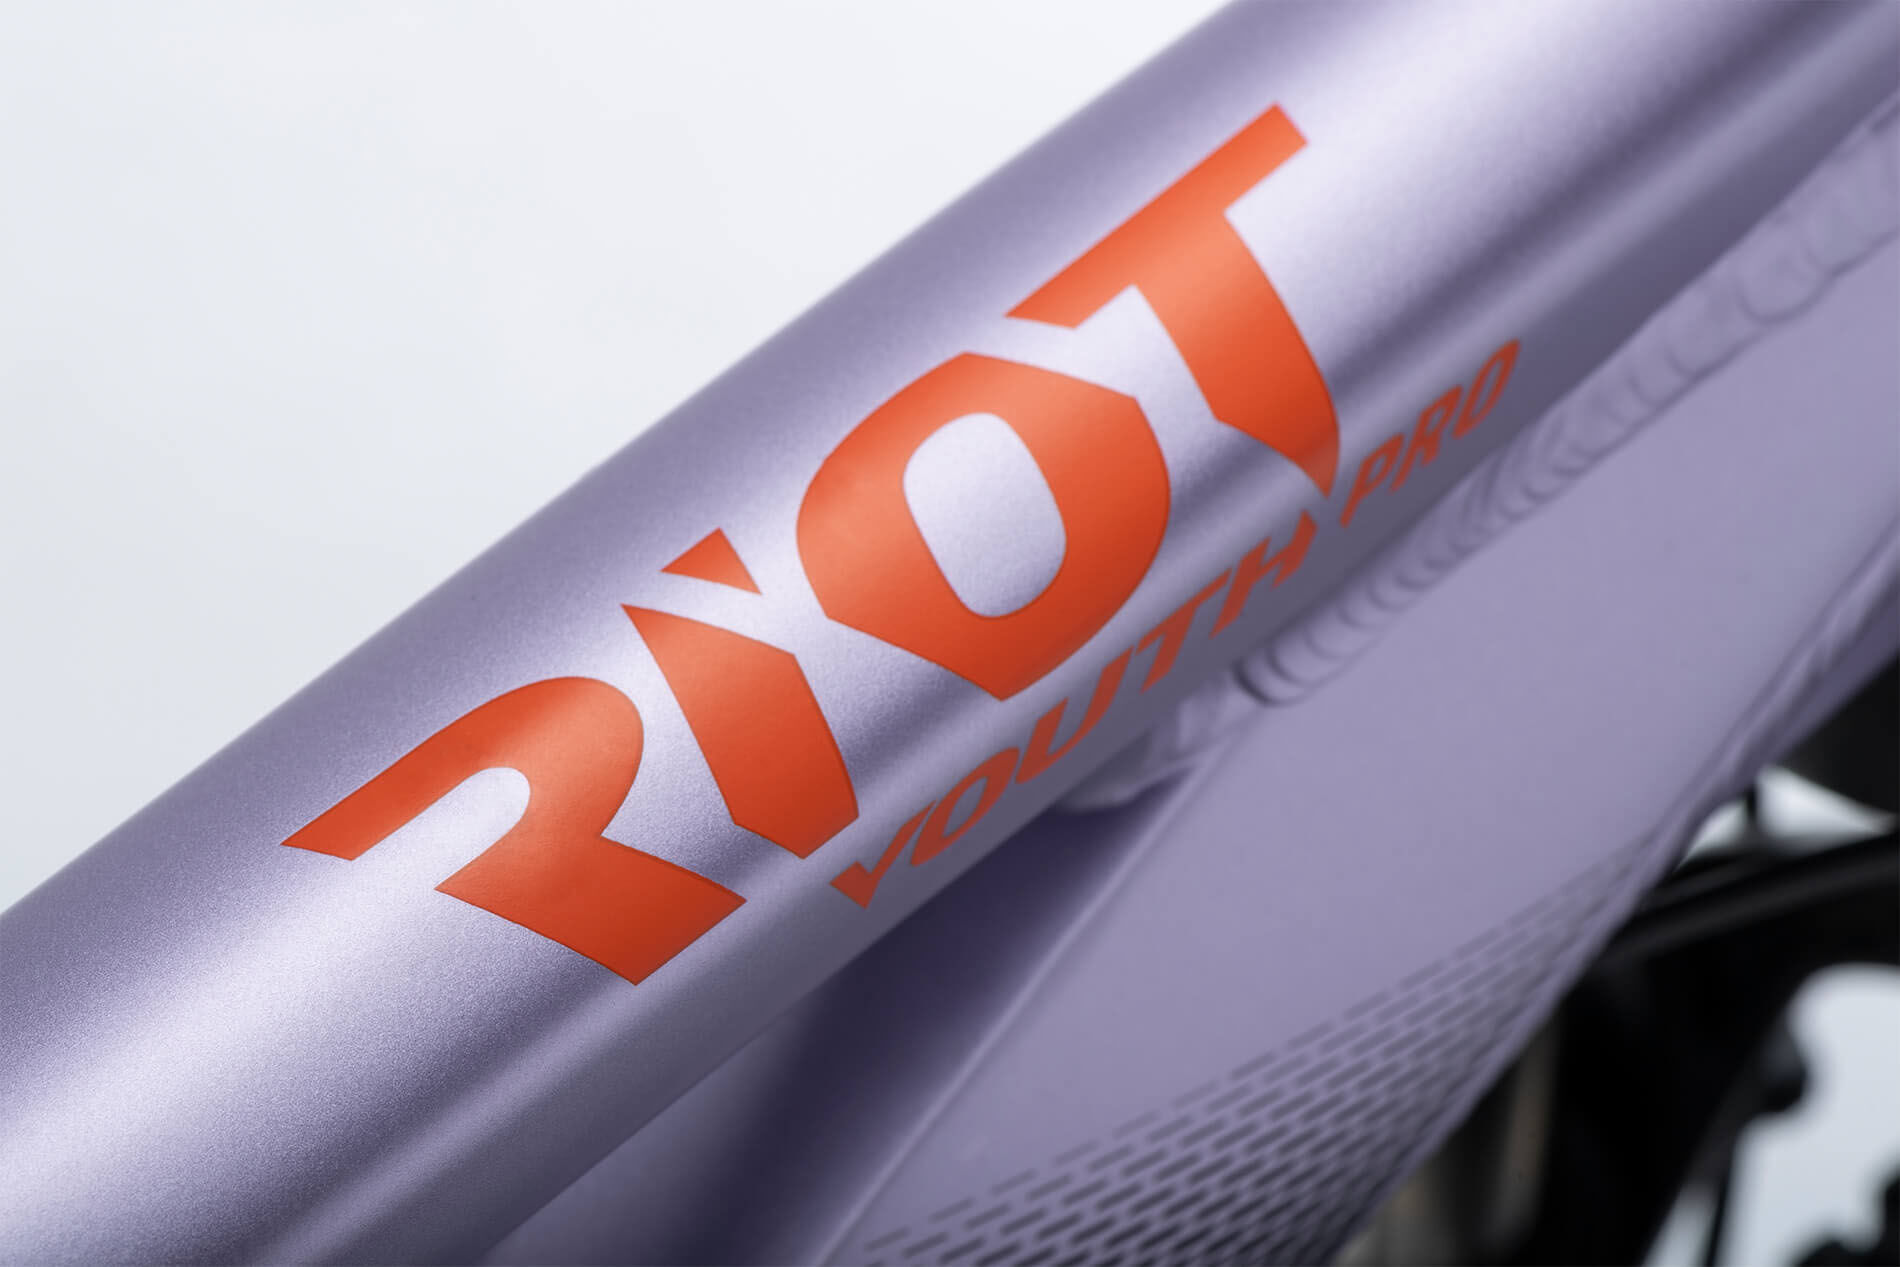 Ghost Riot Youth Pro, 27,5, MTB